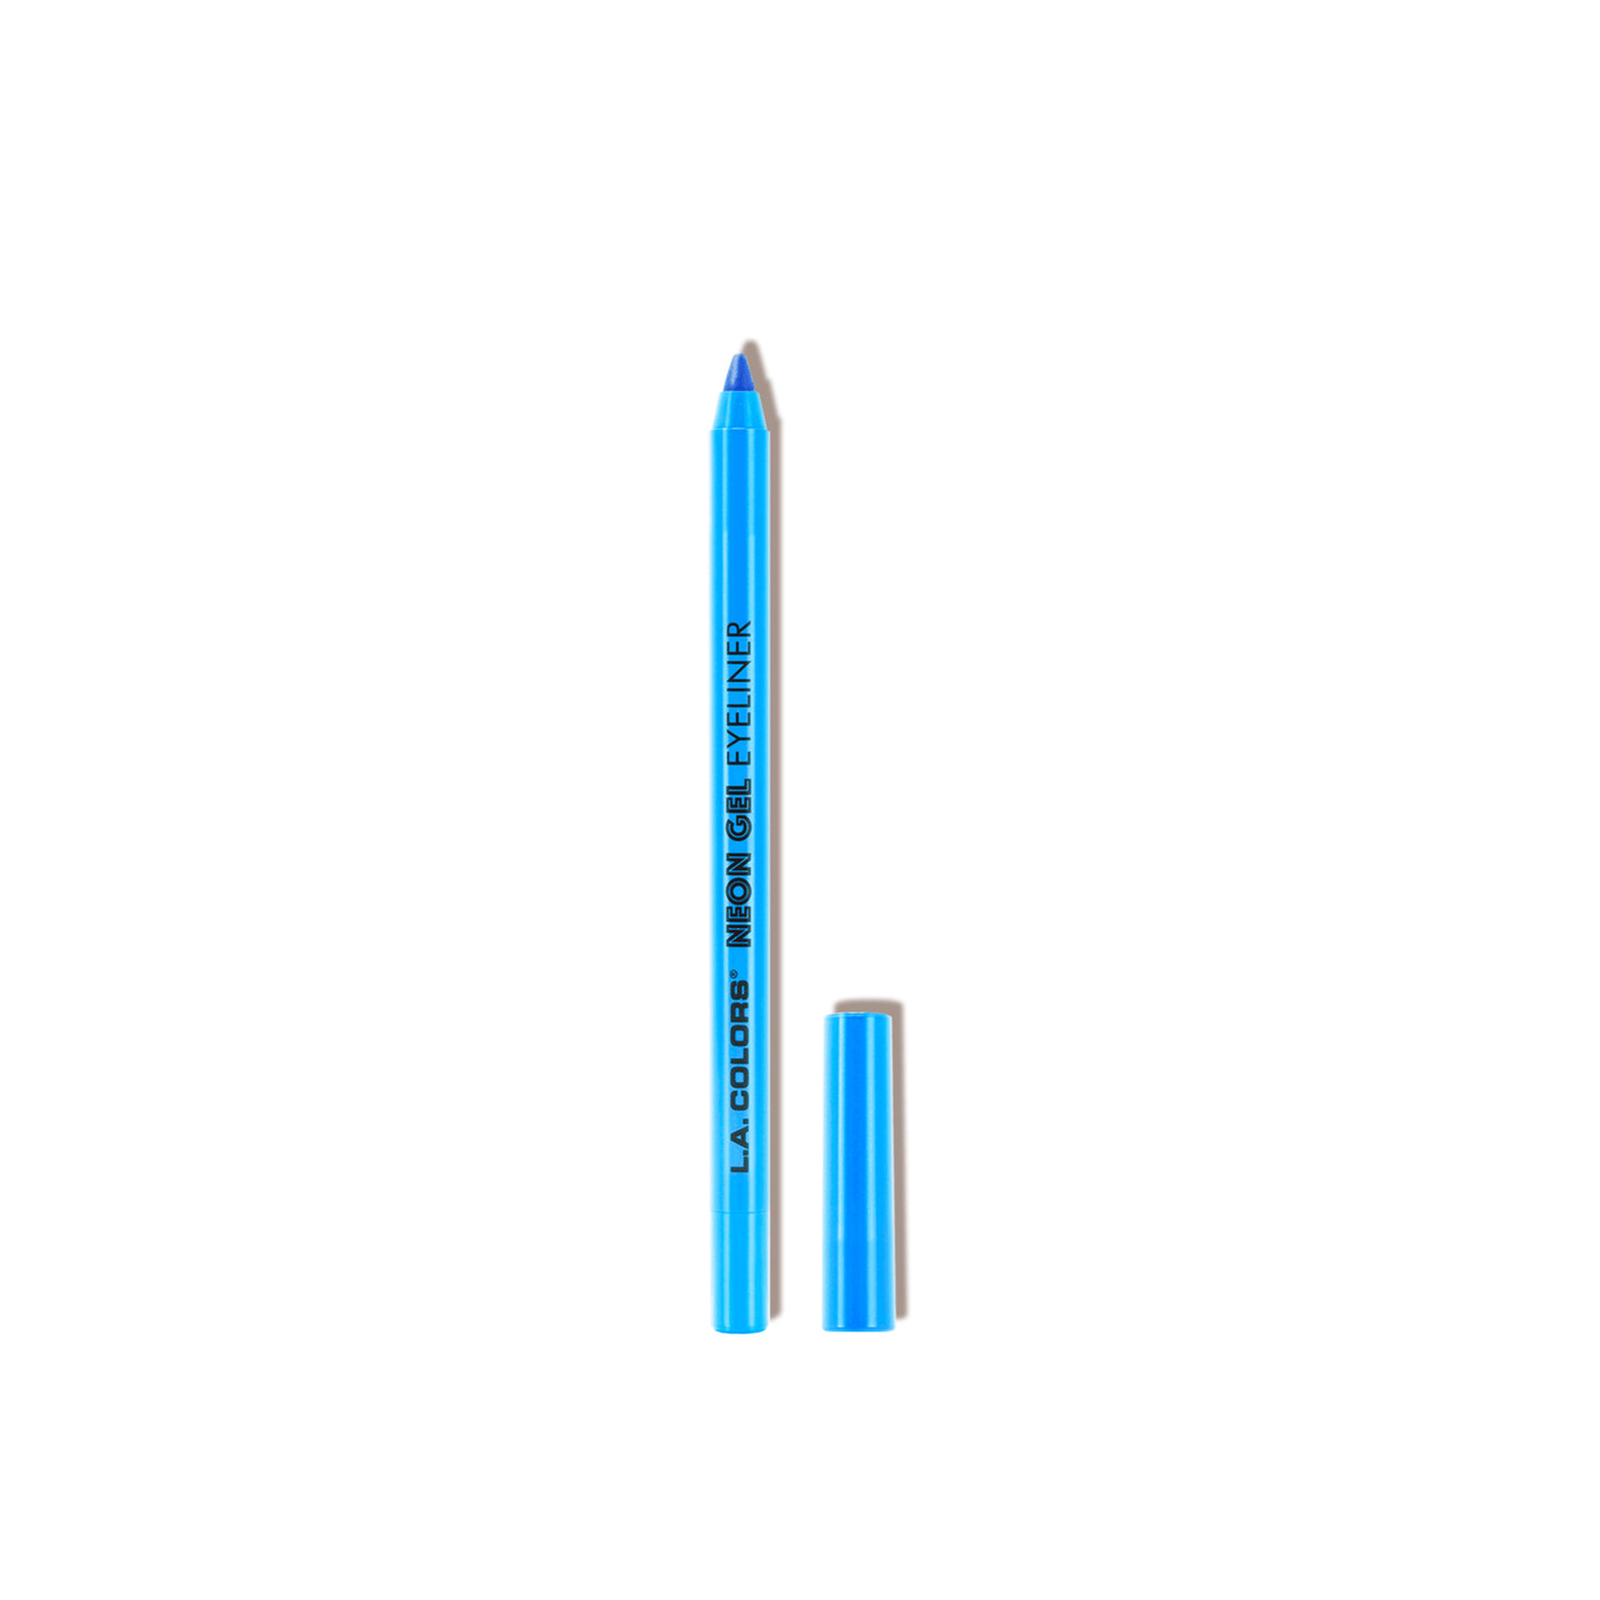 L.A. Colors Neon Gel Eyeliner CP631 Swell 1.5g (1.5g)